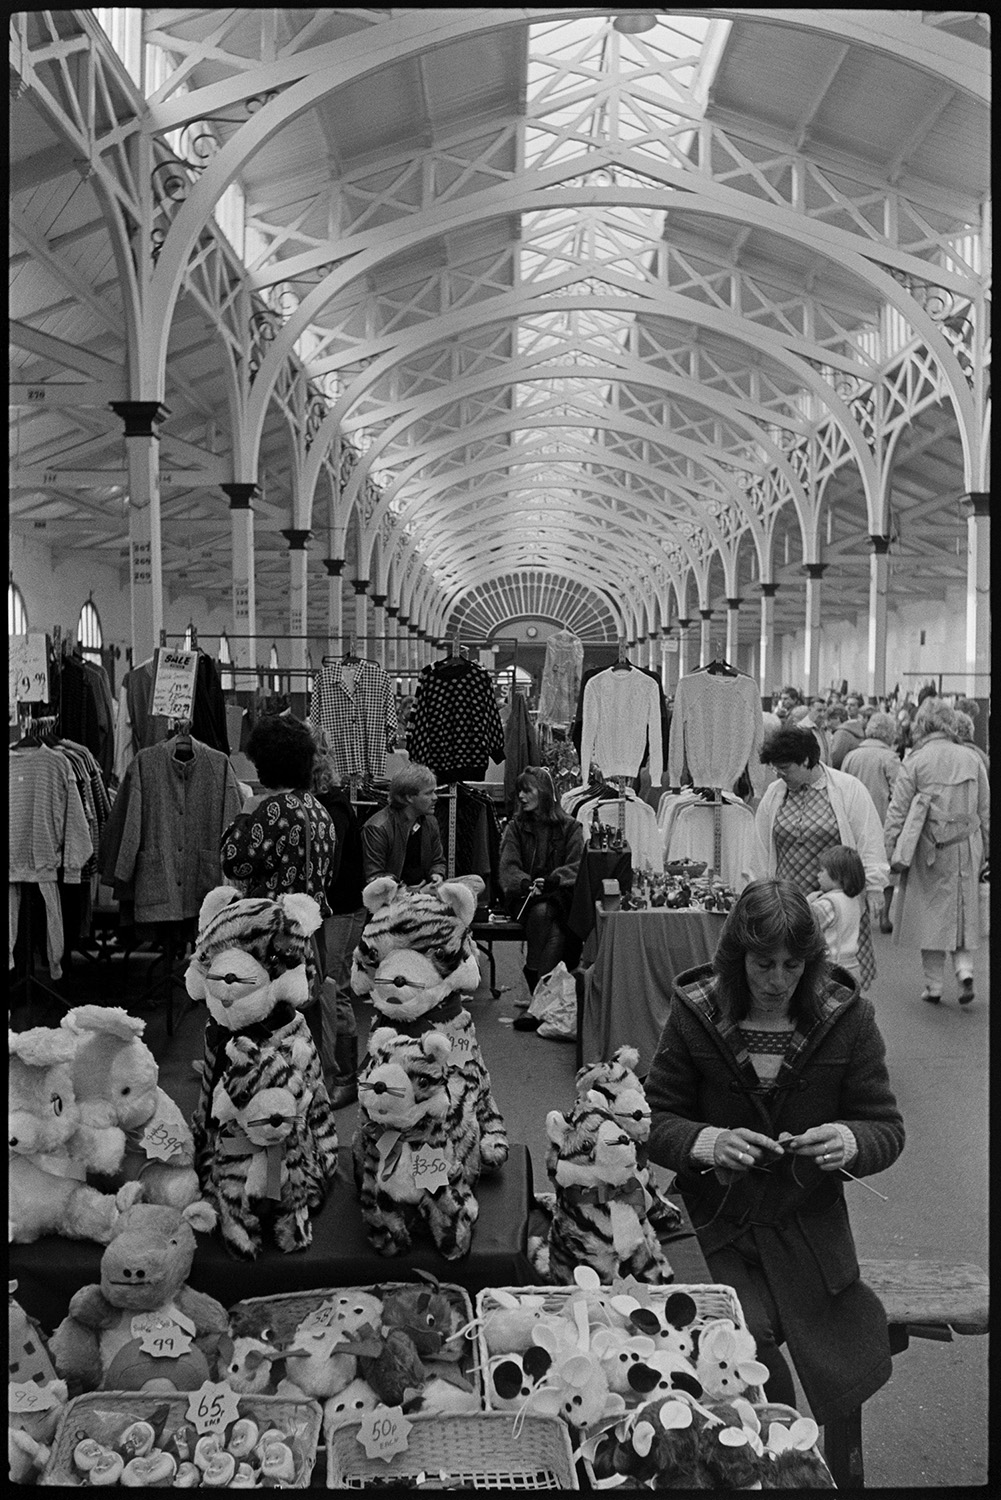 Pannier market with stalls of fruit, vegetables, eggs. 
[A woman running a stall selling soft toys, including tigers, mice and rabbits, at Barnstaple Pannier Market. She is sat by the stall knitting. Customers looking at a clothes stall can be seen in the background.]